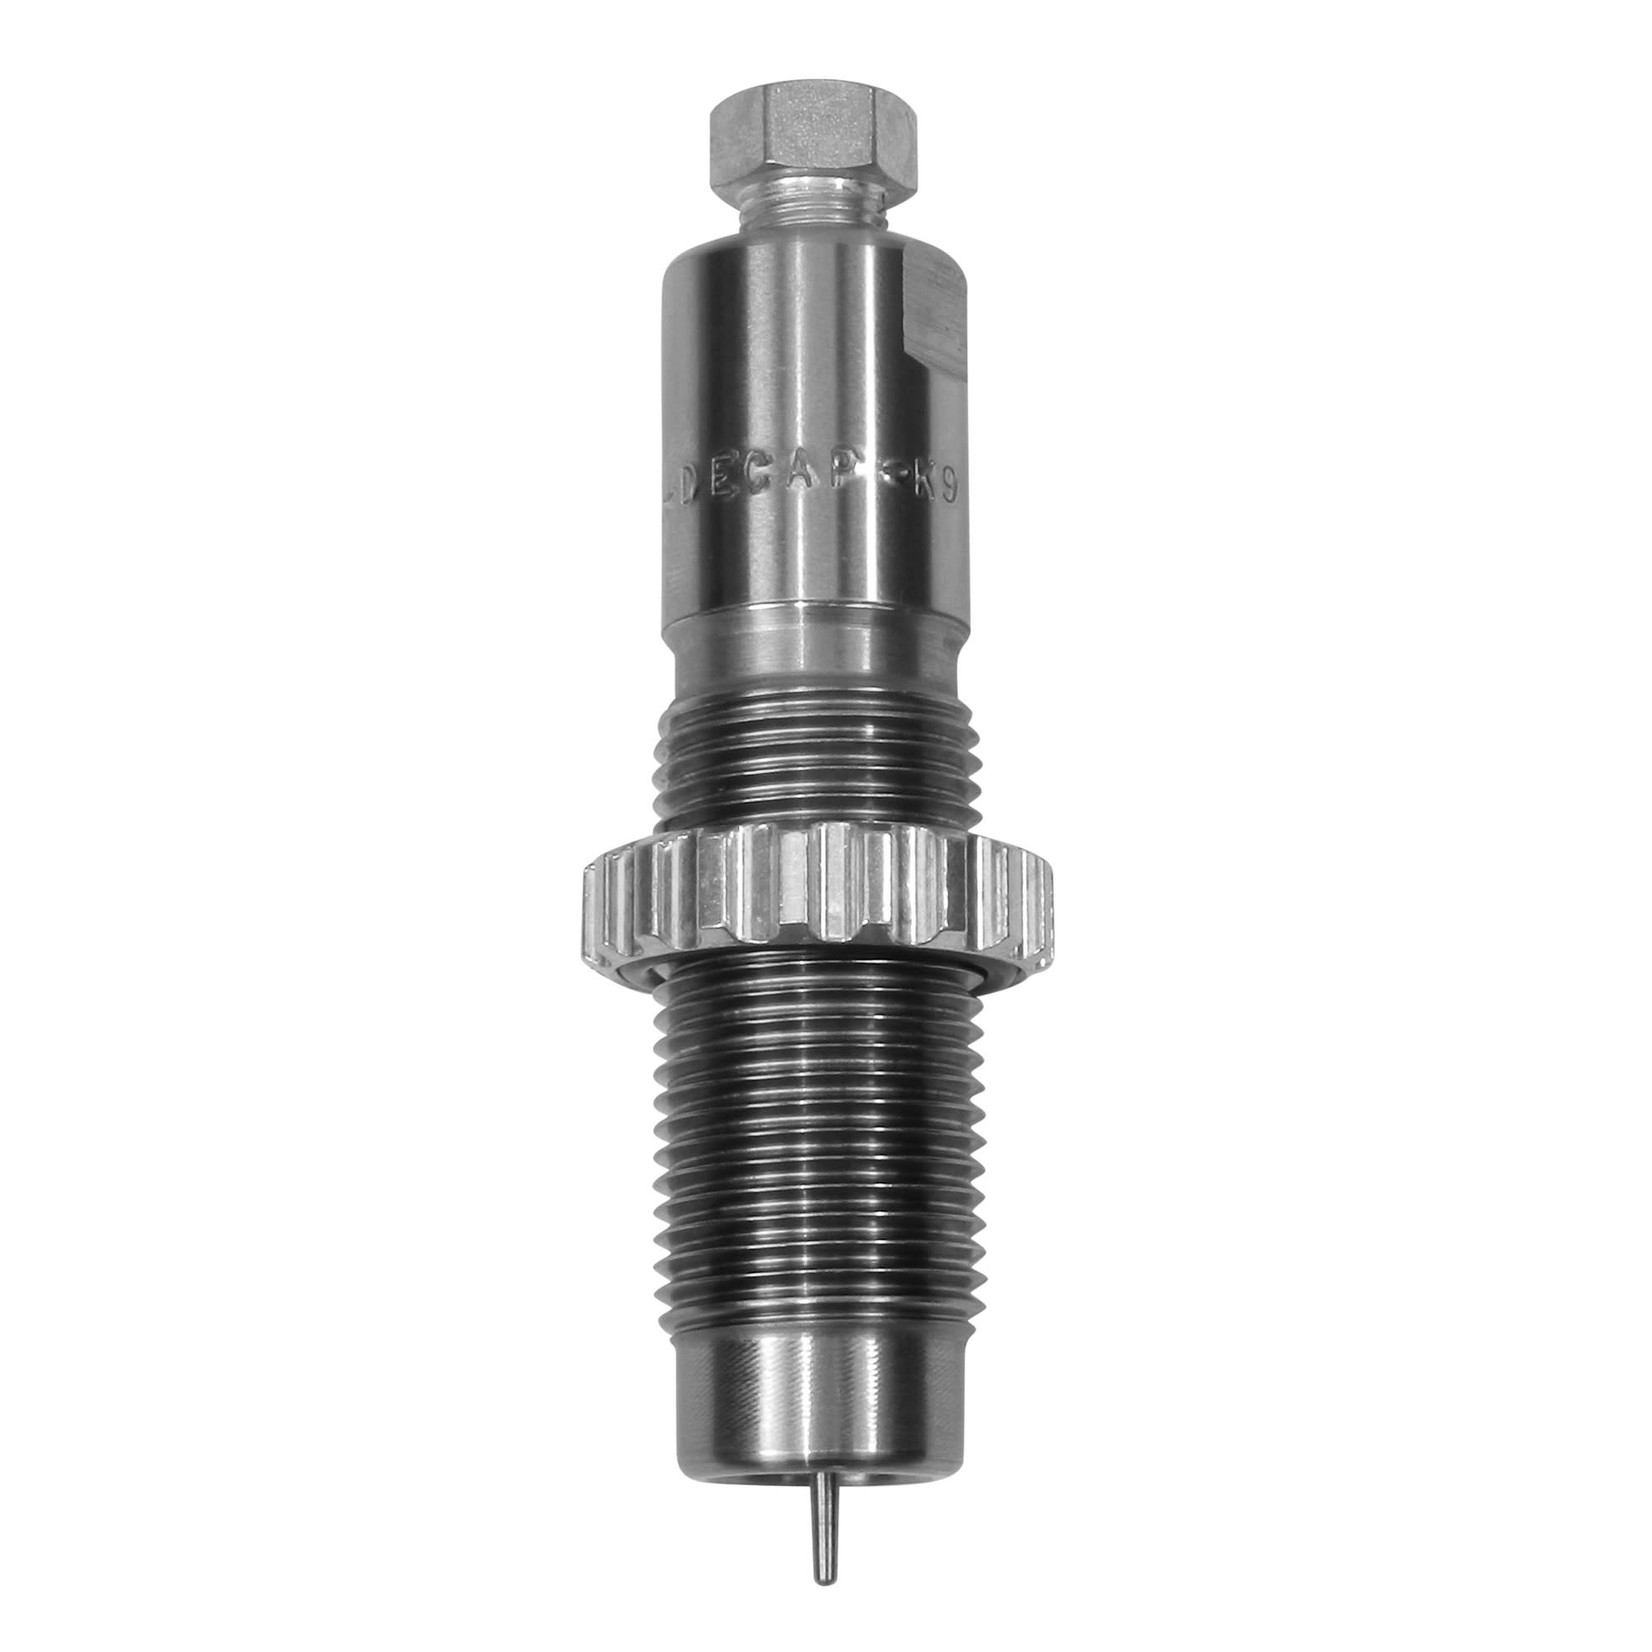 Lee Precision Reloading Lee Universal Decapping Die